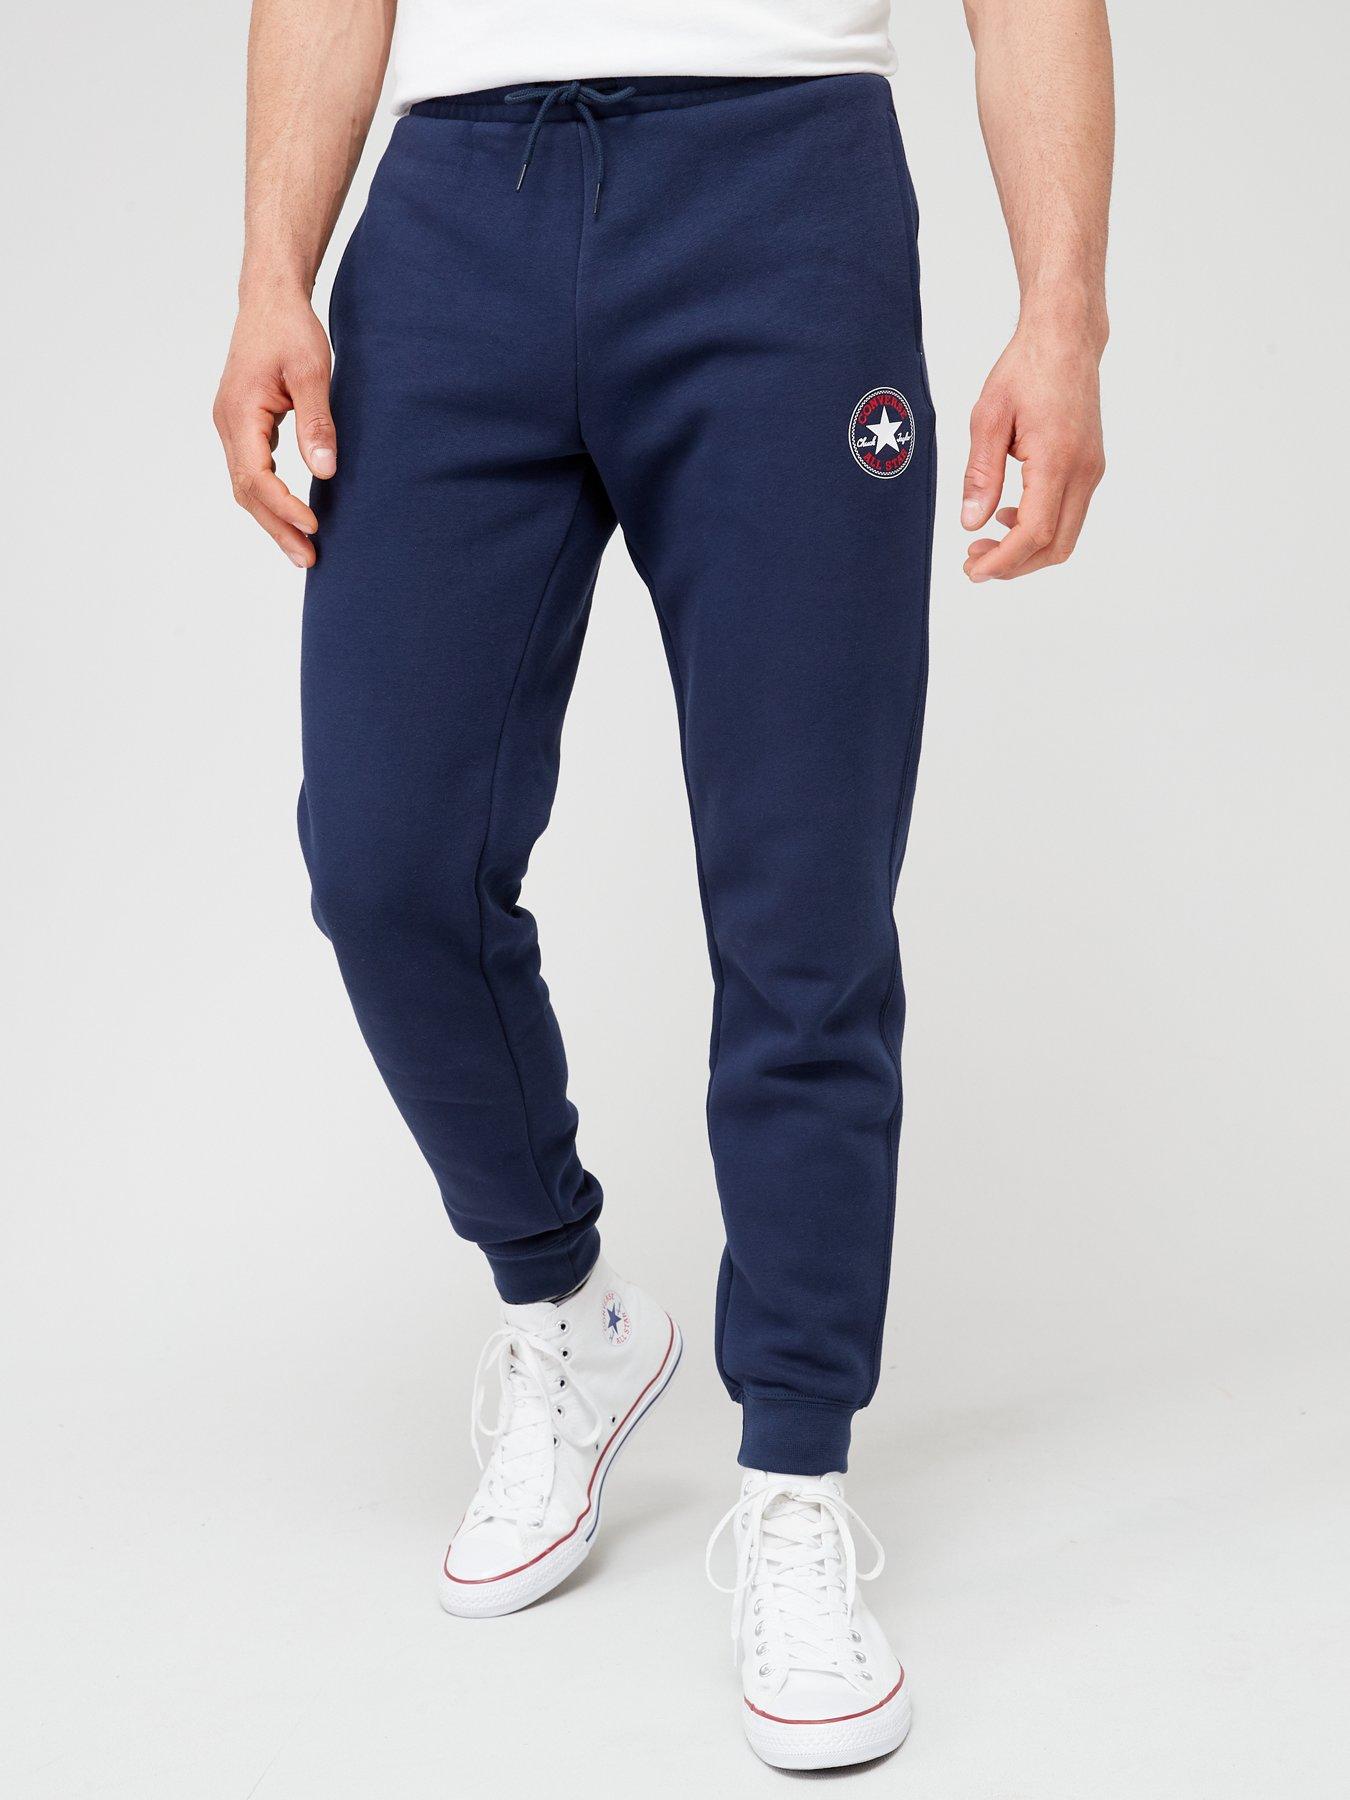 Converse Jogging bottoms | Mens | Sports & | www.very.co.uk